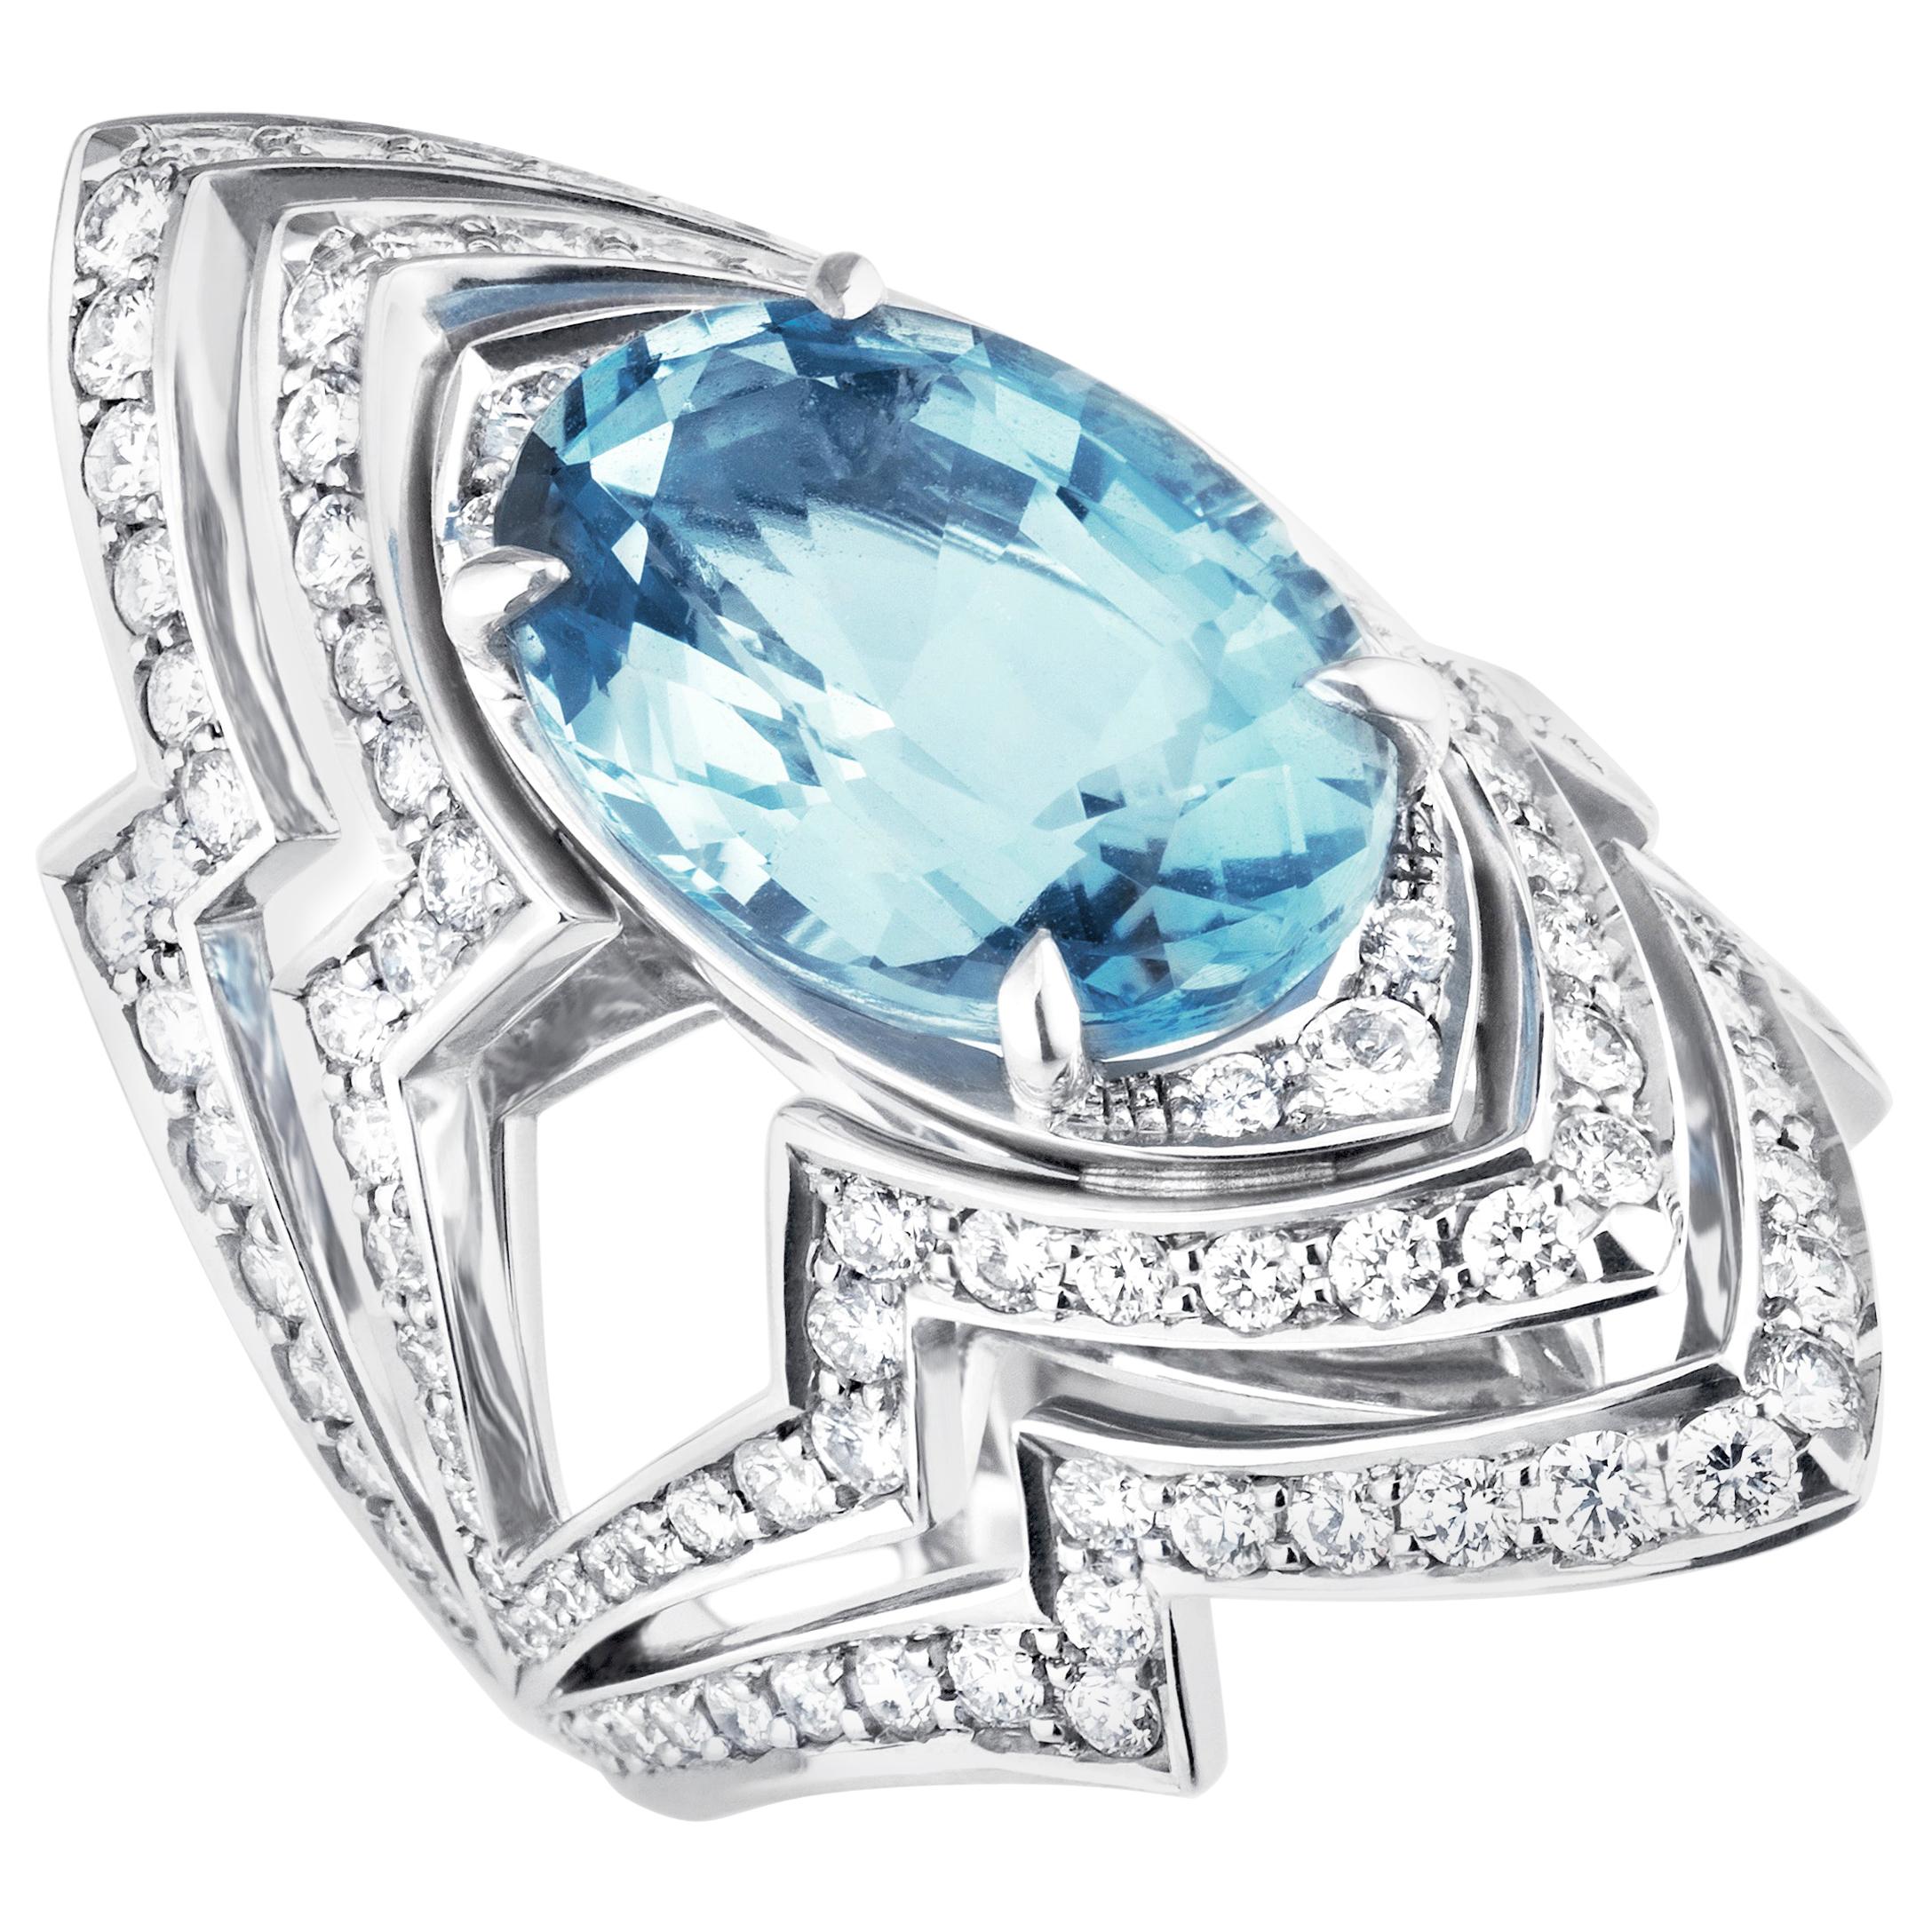 Stephen Webster Lady Stardust 18 Karat White Gold and Aquamarine Couture Ring